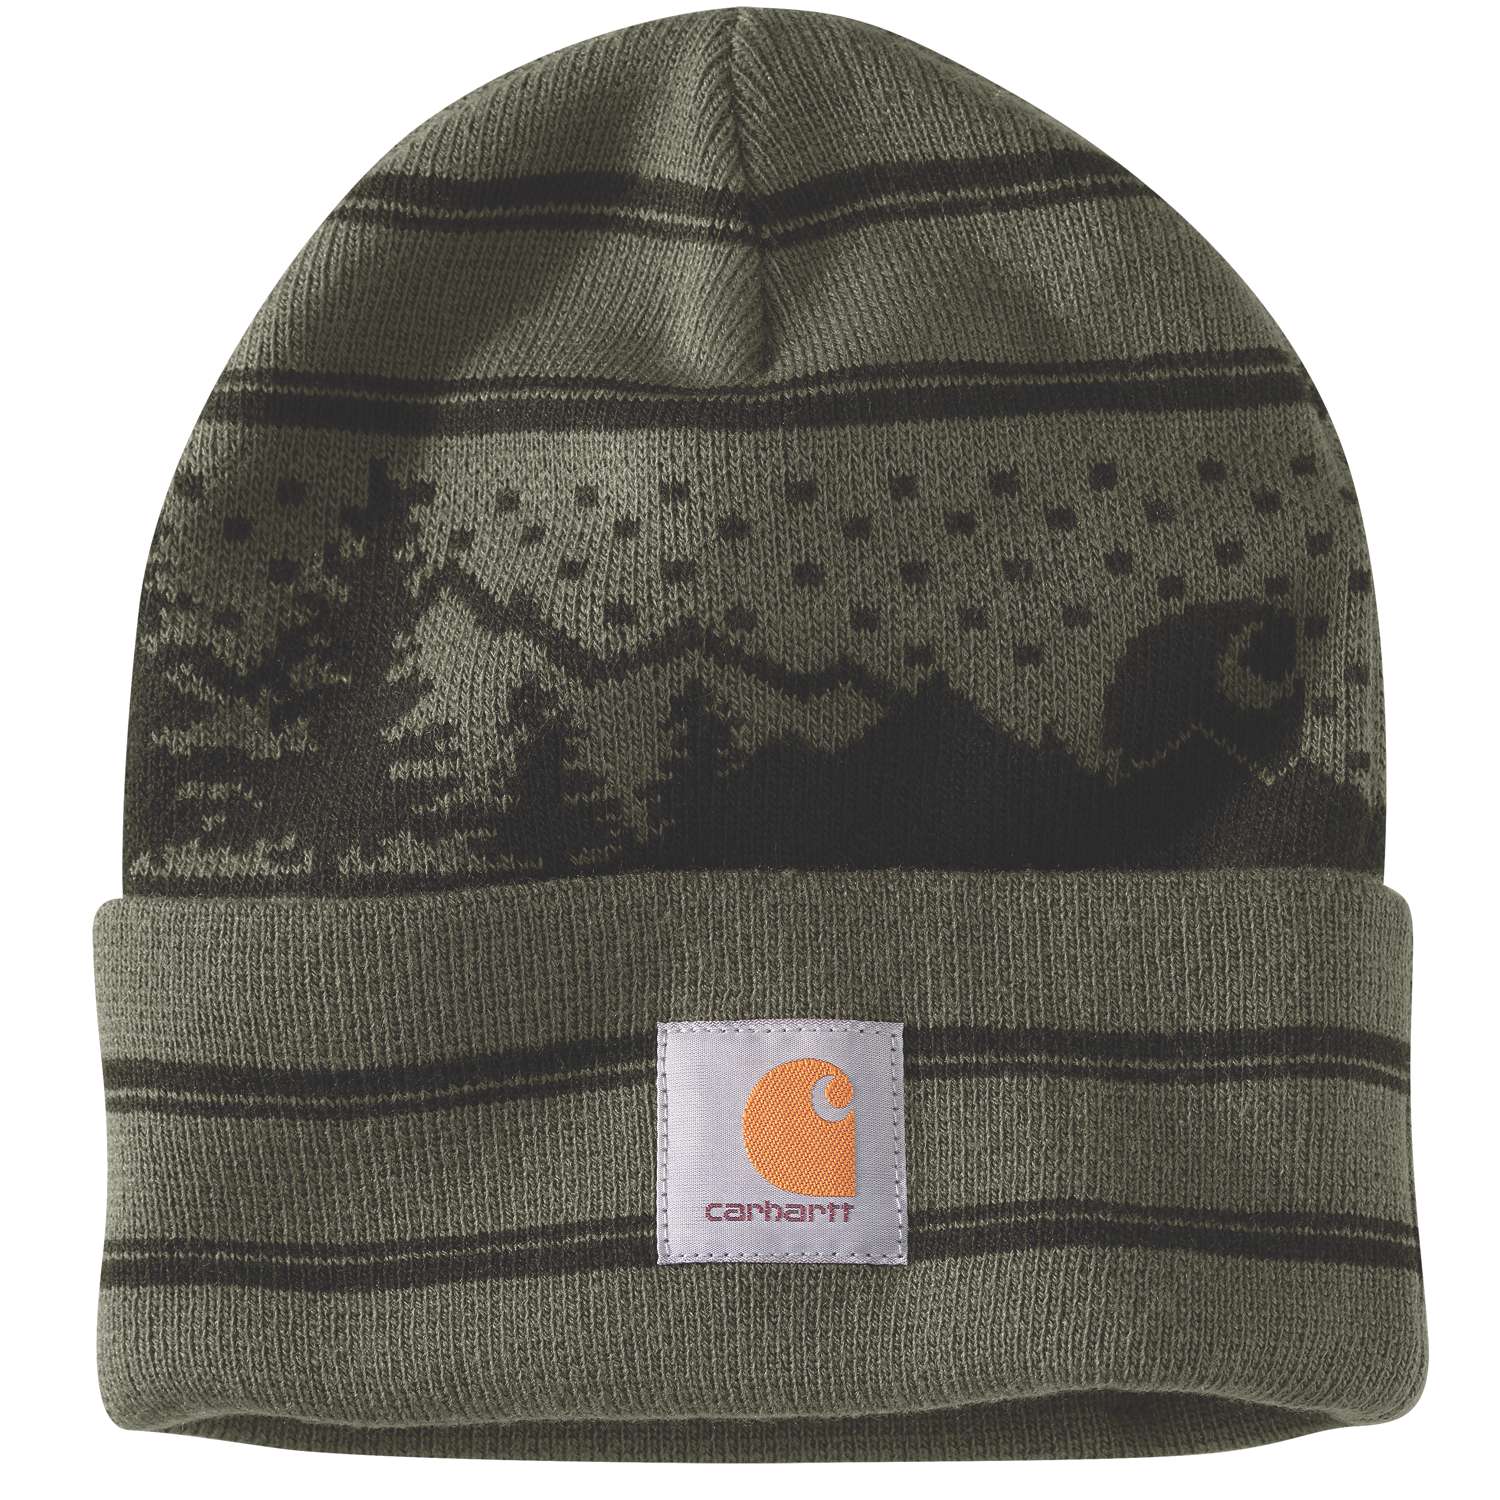 Carhartt Cuffed Beanie With Outdoor Graphic Knit Holiday Beanie